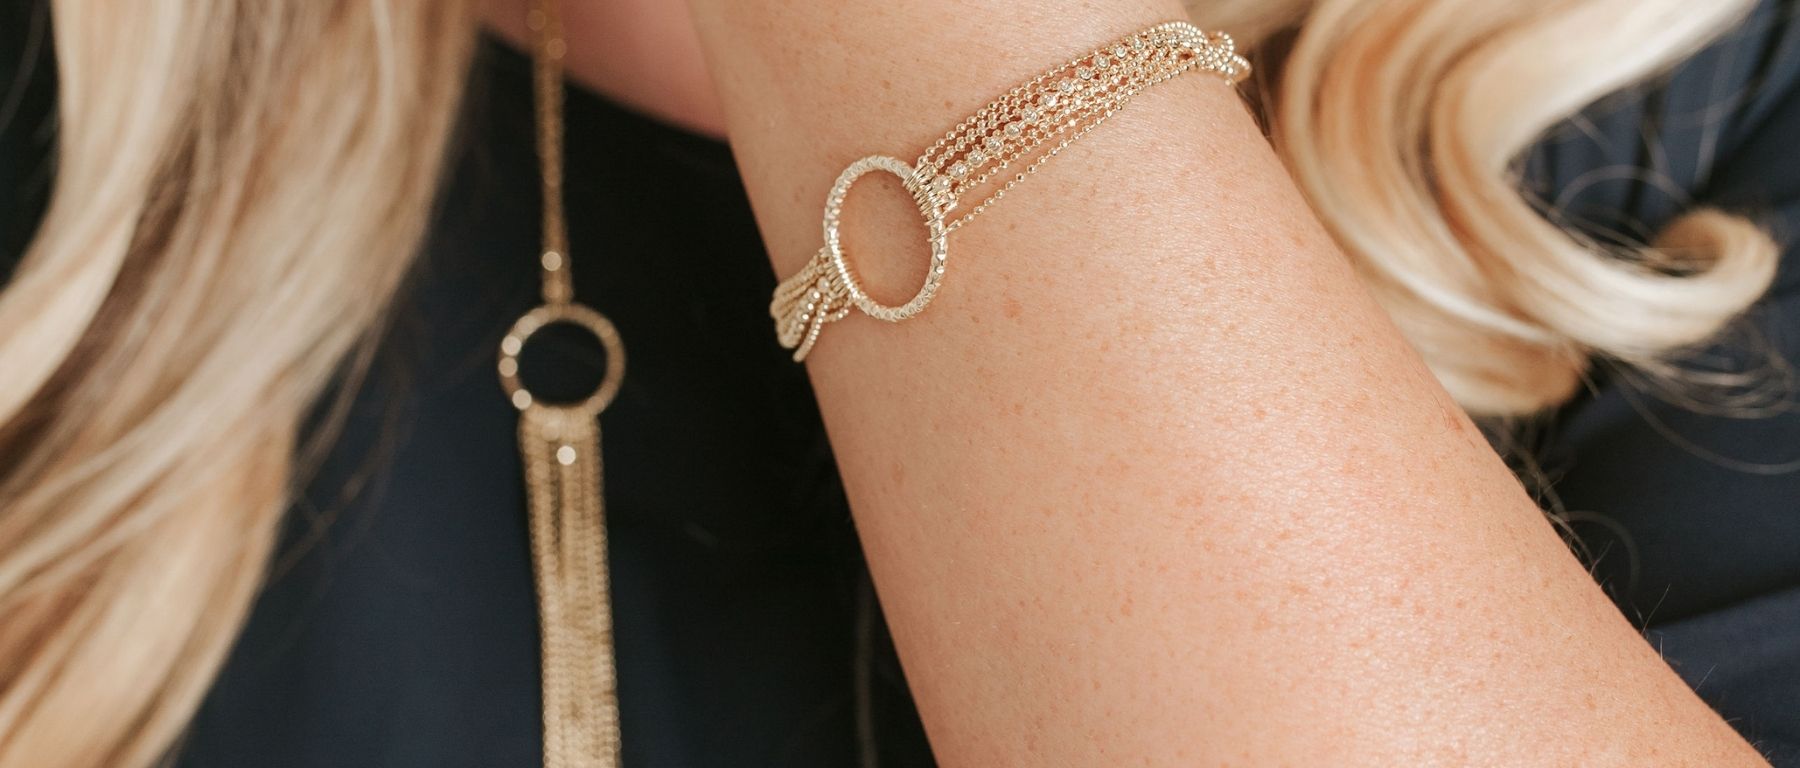 9 Tips for Buying Valentine's Day Jewelry